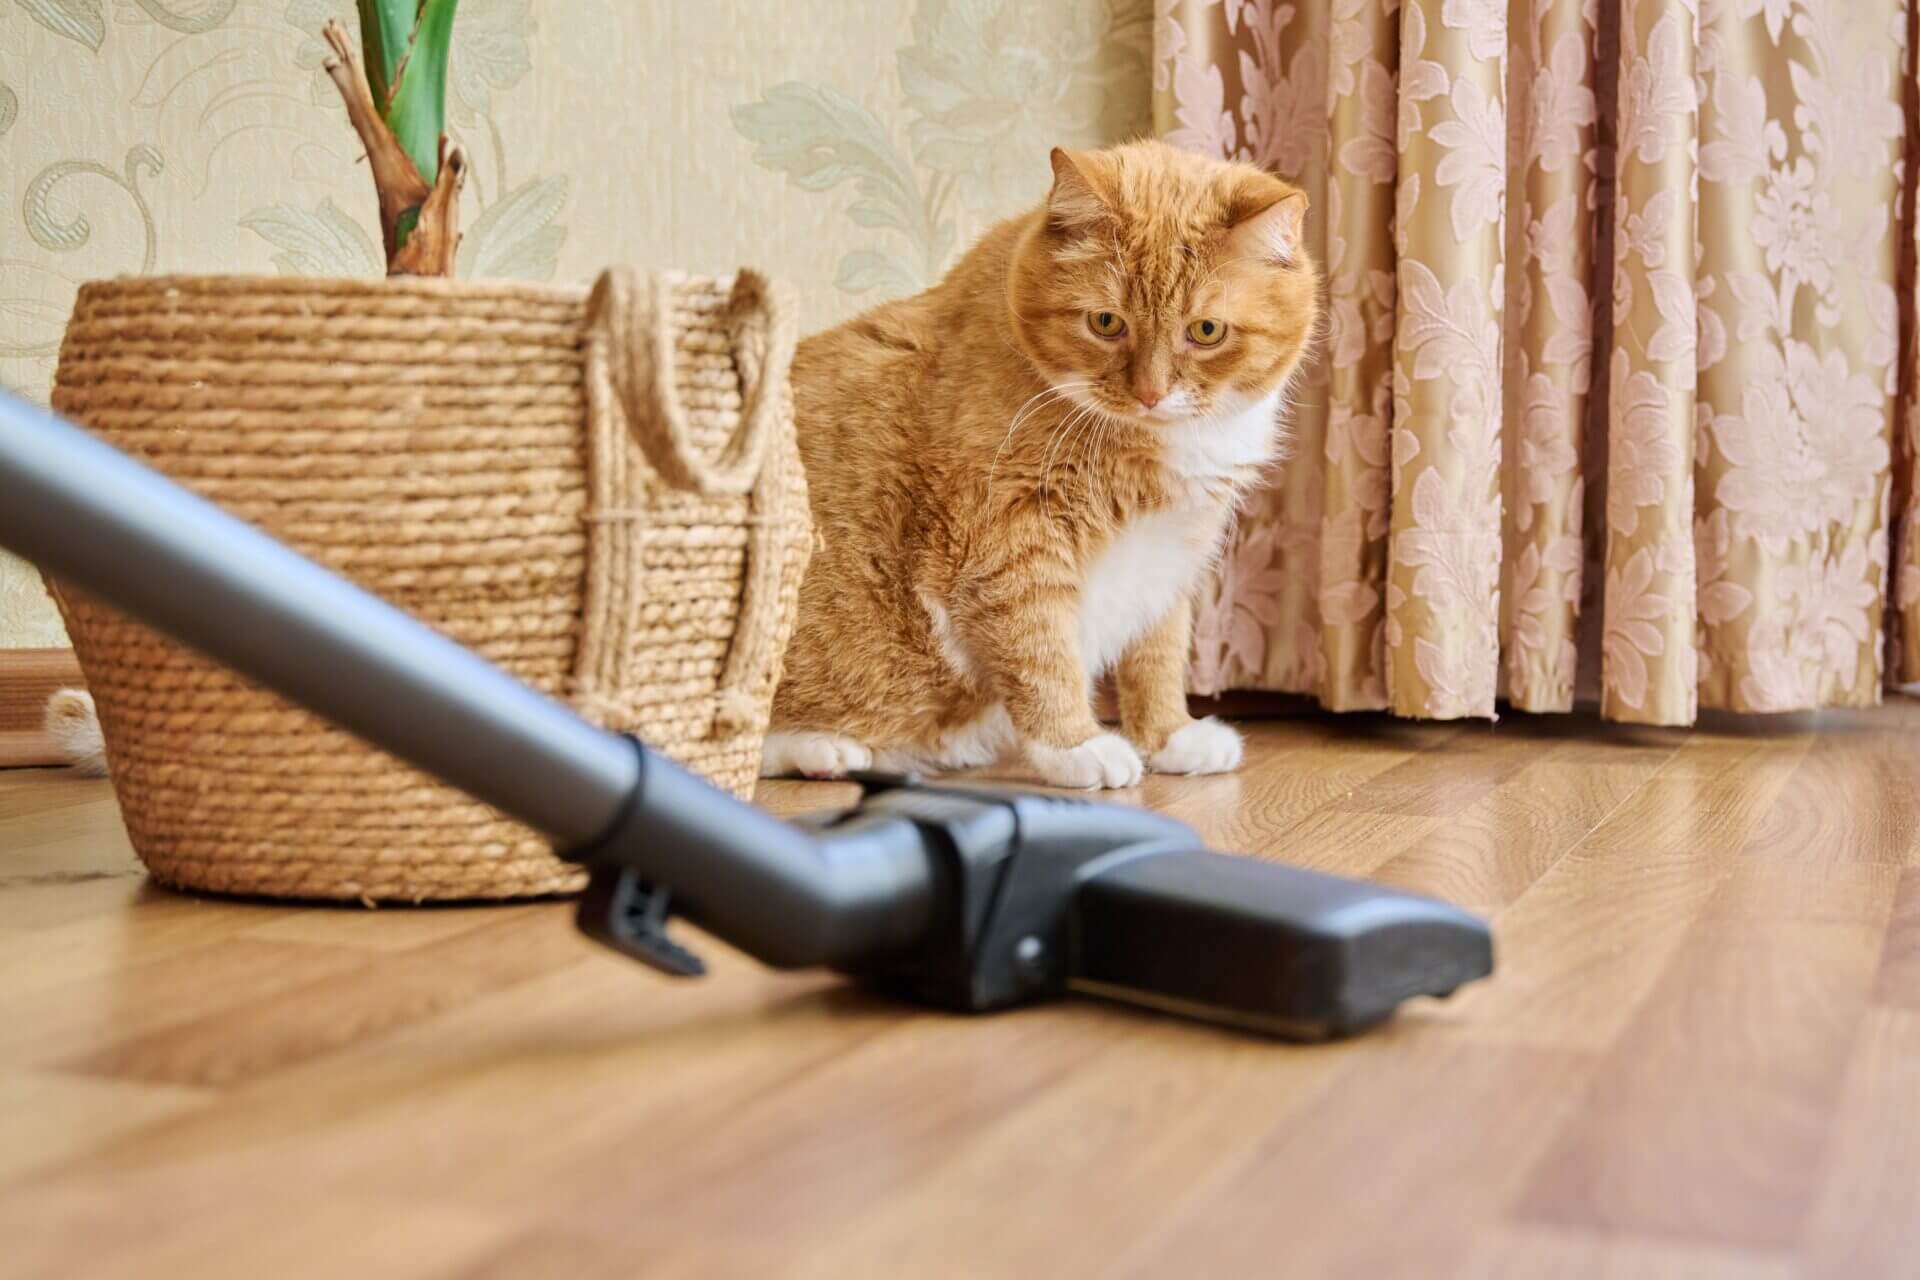 Woman vacuuming her house while her cat is looking, thanks to house cleaning tips for pet owners